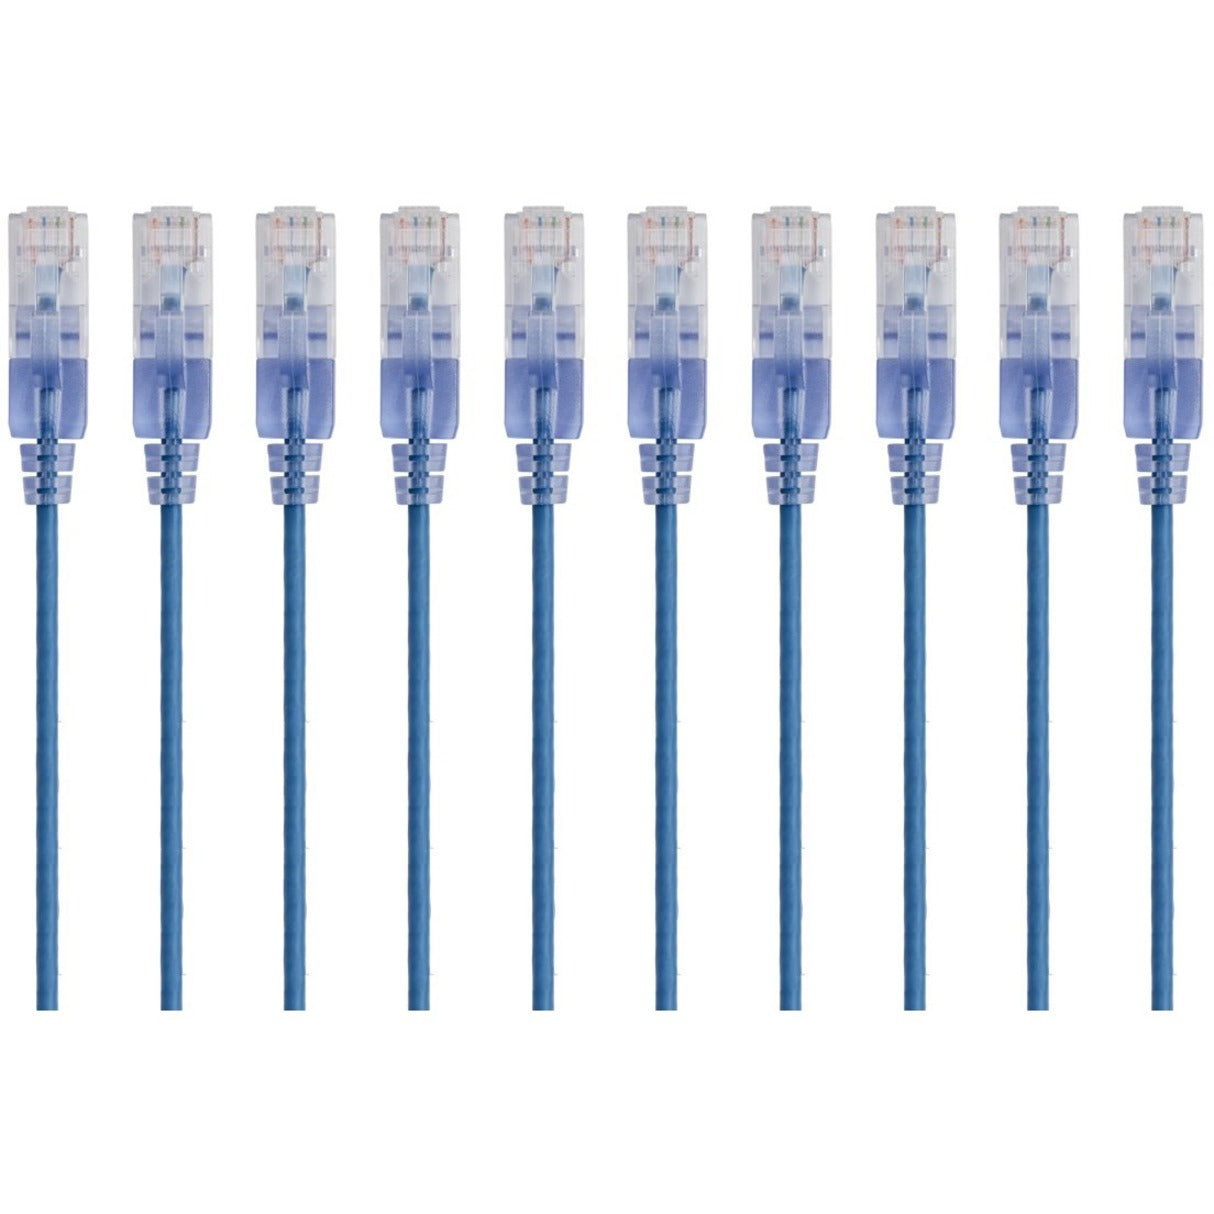 Monoprice 15150 SlimRun Cat6A Ethernet Network Patch Cable 1ft Blue, 10-Pack